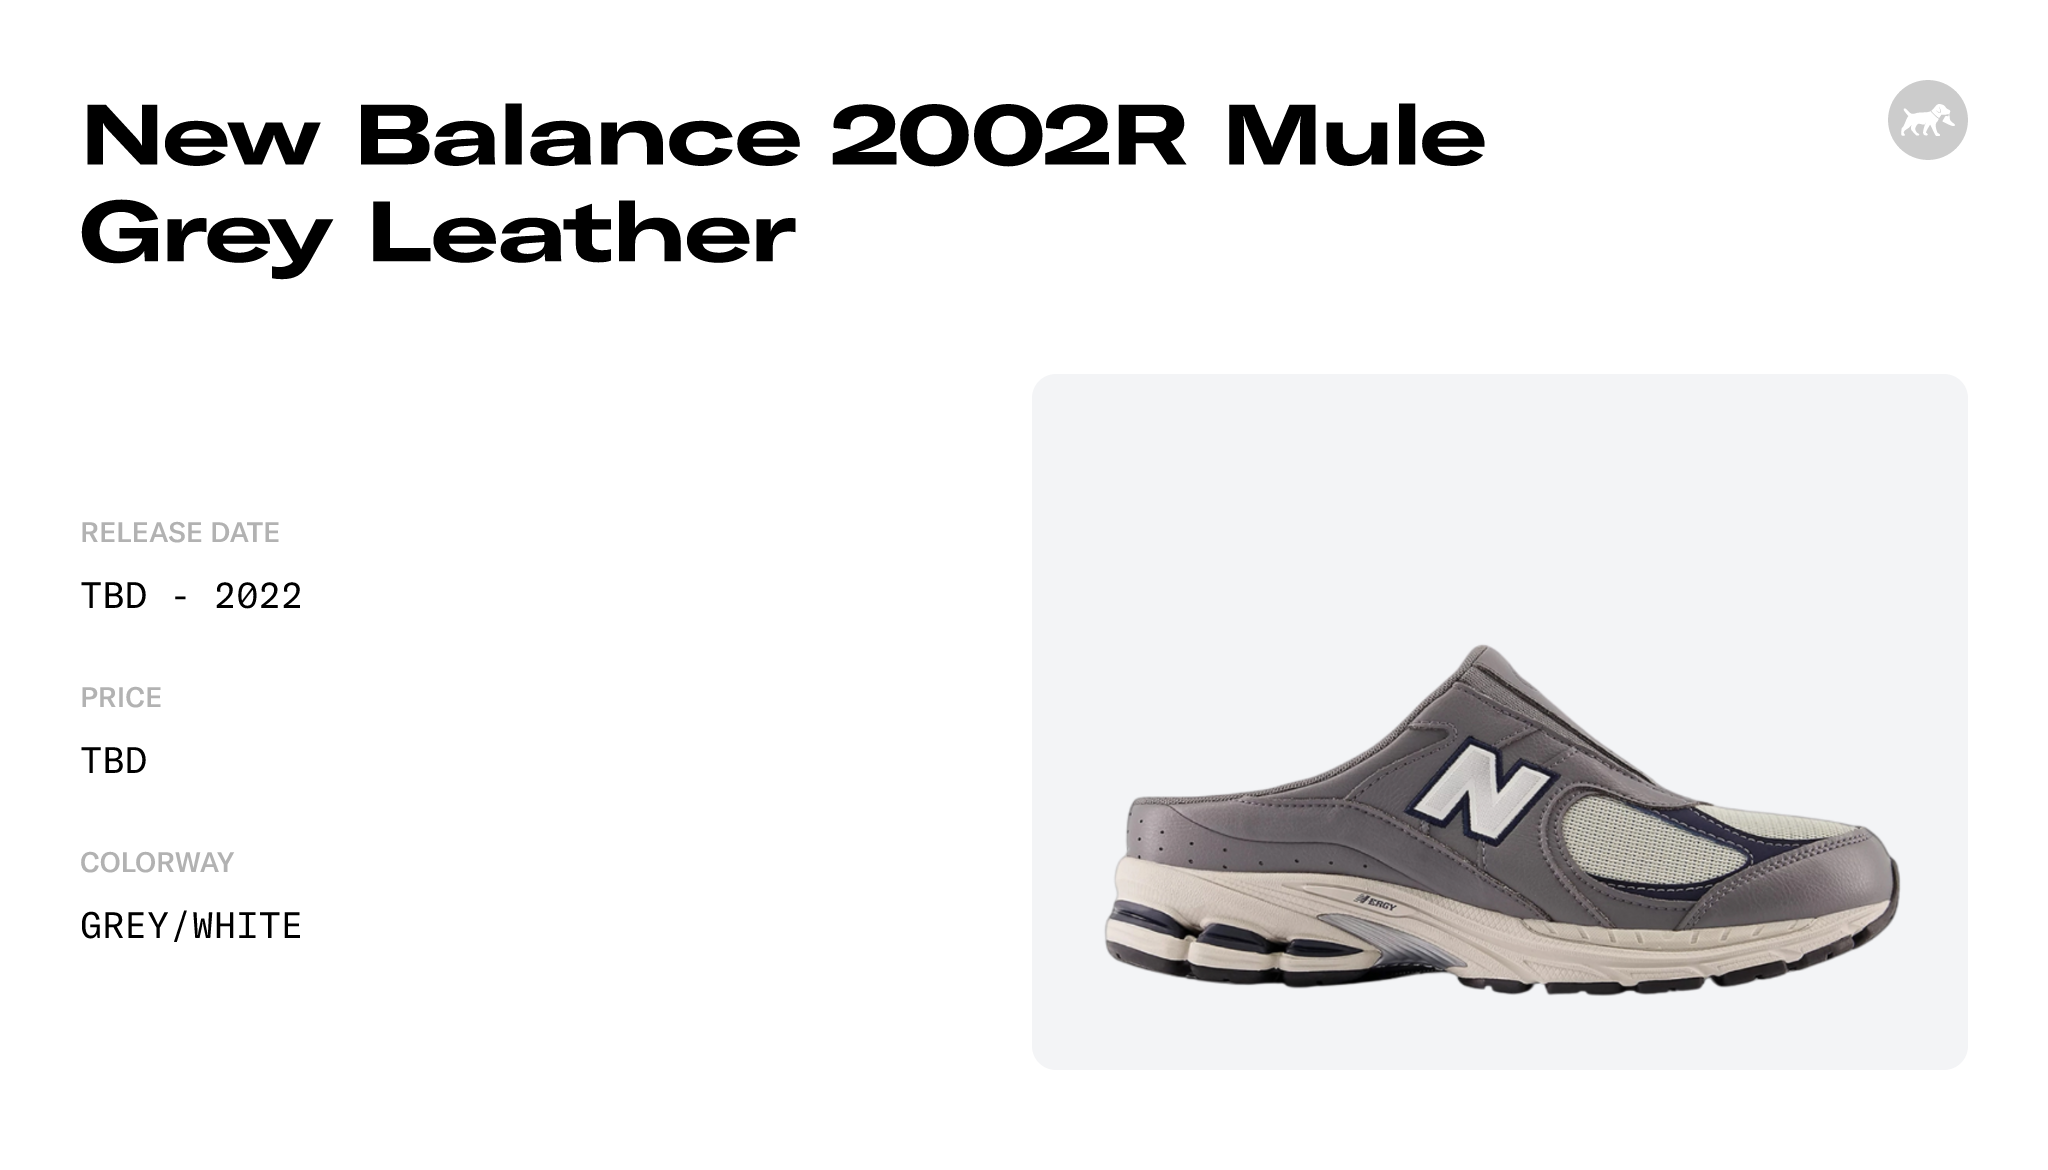 New Balance 2002R Mule Grey Leather - M2002RMJ Raffles and Release